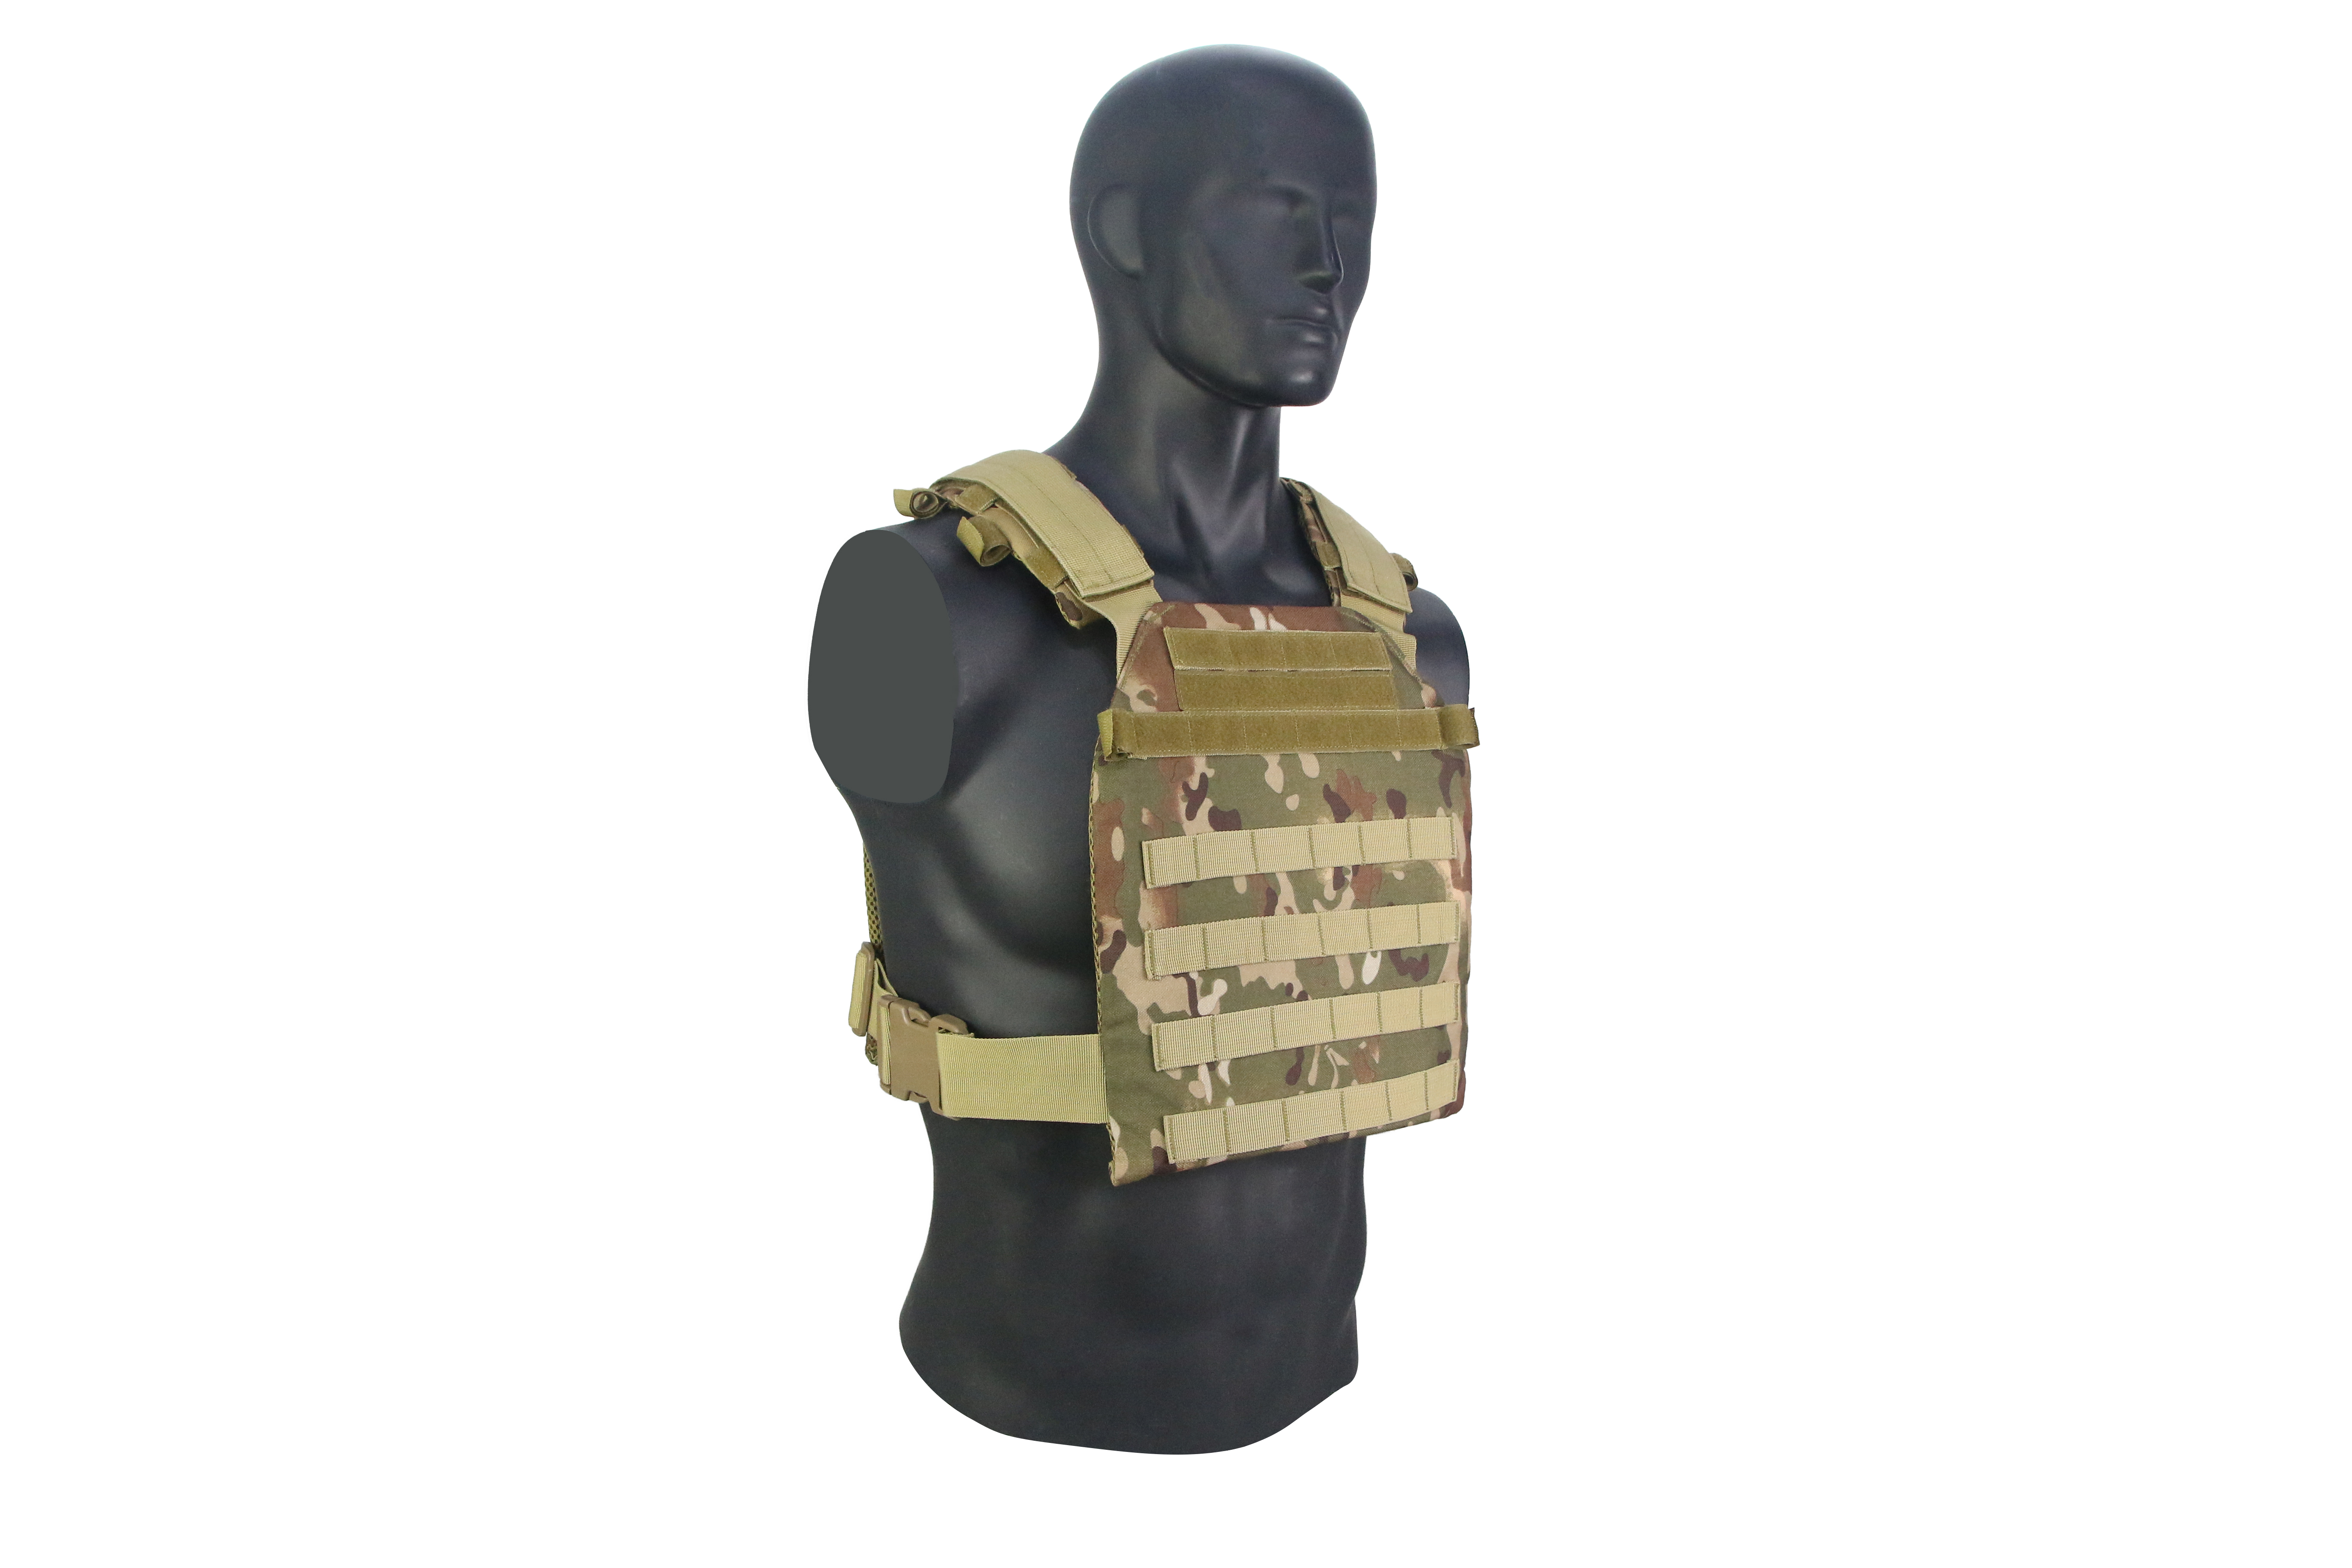 SENTRY PLATE CARRIER INCLUDES FRONT And REAR FORMED SHOOTERS CUT AR500 COATED ARMOR PLATES